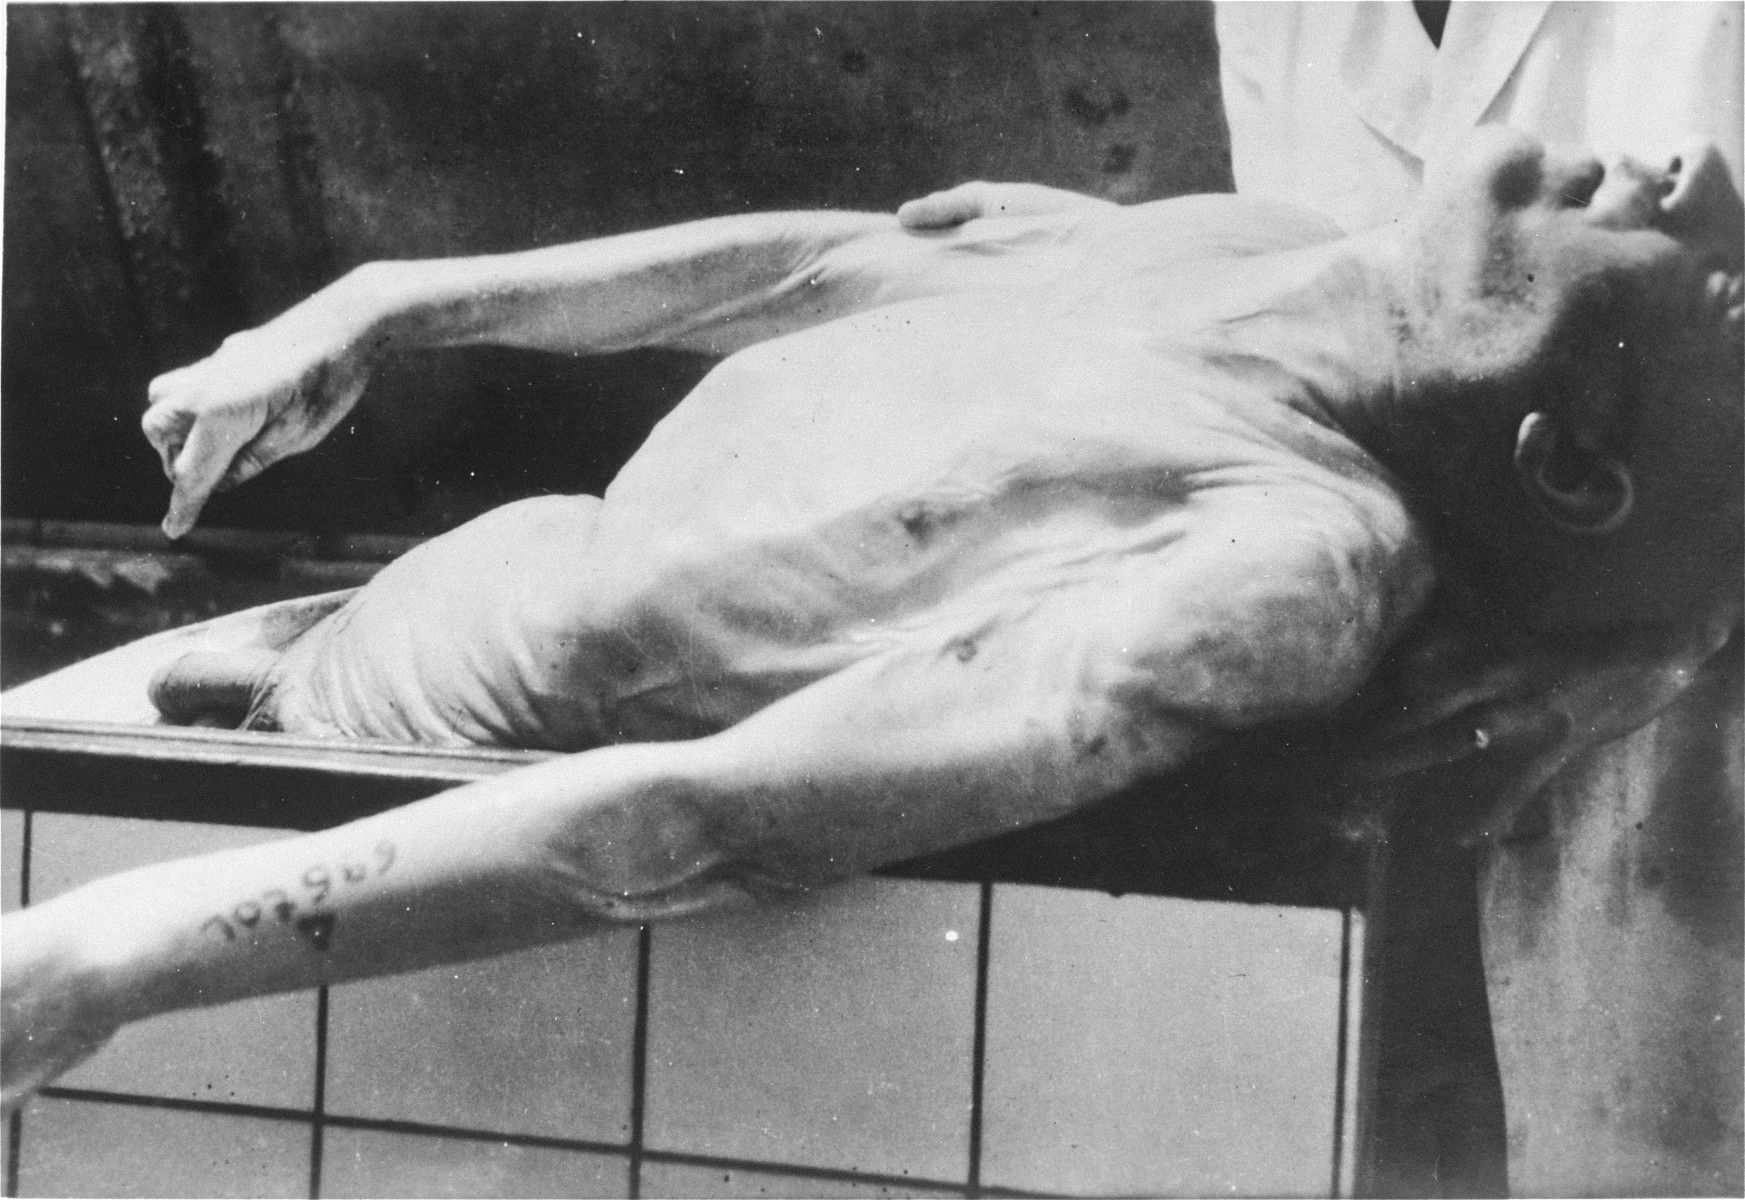 The corpse of a Jewish prisoner who was gassed at Natzweiler-Struthof and whose body was kept in a vat of alcohol at the Strasbourg University Anatomical Institute for over a year until it was discovered by Allied forces.

The prisoner has been identified as Max Menachem Taffel.

At the end of August,1943, eighty-six Jews, including 30 women, were gassed in Natzweiler-Struthof for the purpose of constructing a collection of skulls and skeletons to be kept at the Strasbourg University Institute of Anatomy, under the directorship of August Hirt.  The individuals were "selected" at Auschwitz for their special bone structure and transferred to Natzweiler, where SS Captain Josef Kramer, the commandant of the camp, oversaw the operation.  The corpses then remained in vats of alcohol for over a year, the project envisioned by Hirt having never been completed.  When Allied forces approached Strasbourg in November 1944, SS administrators were unaware that evidence of the crime still existed at the Institute, and only at the last minute ordered the bodies destroyed.  This operation failed, however, and 16-17 of the bodies fell into Allied hands. [Klarsfeld, S., ed. The Struthof Album, 1985]